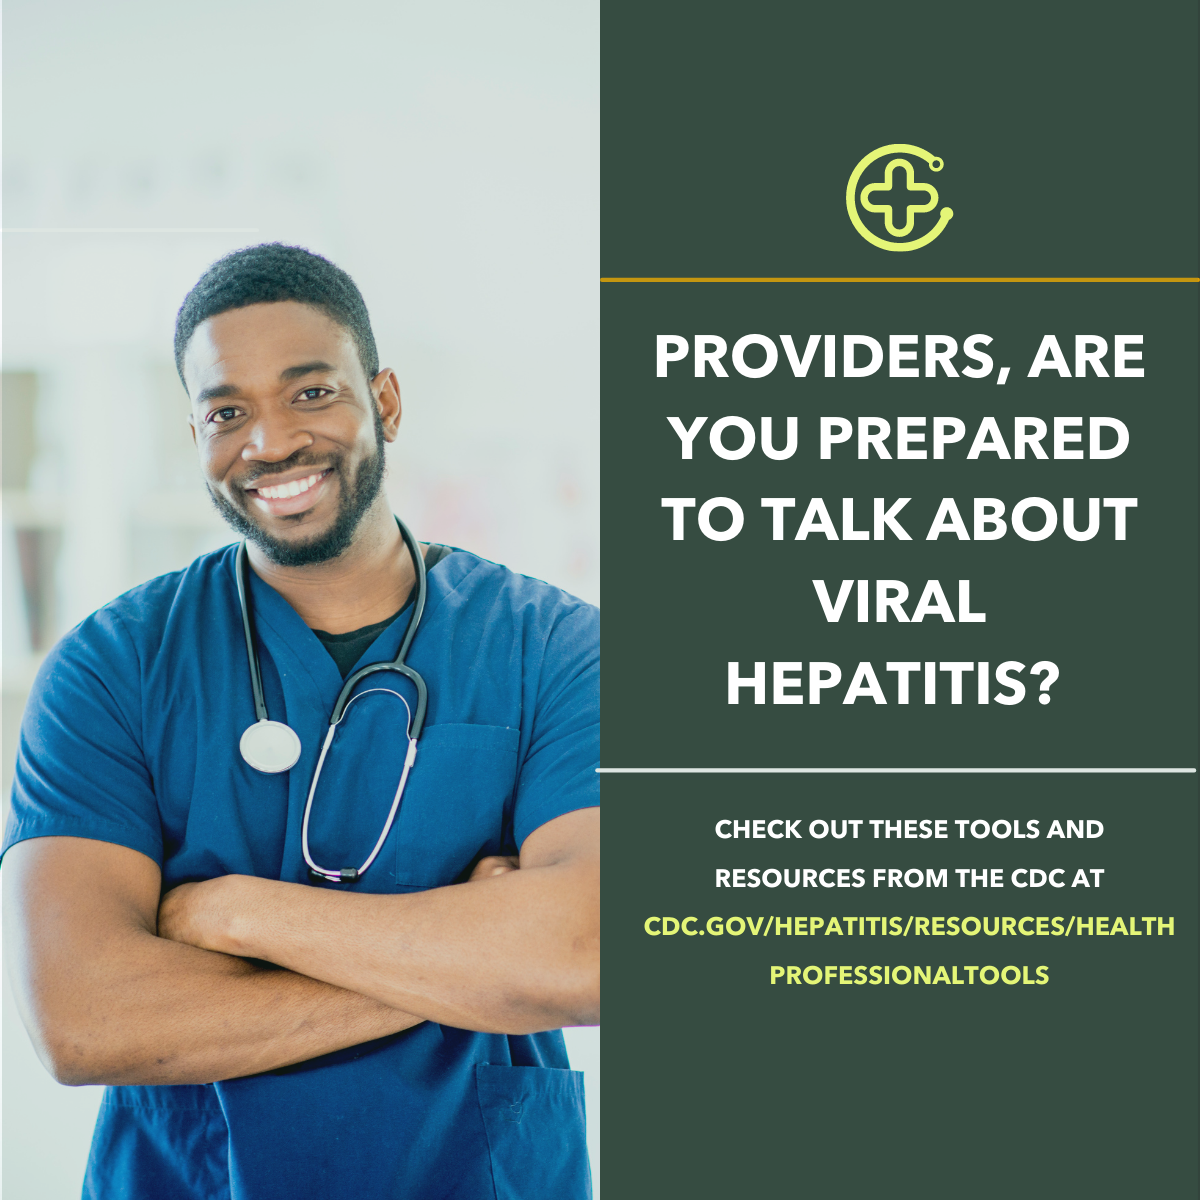 Image of Black male provider with arms crossed and smiling. Text next reads: Providers, are you prepared to talk about viral hepatitis? Check out info and resources from CDC.  